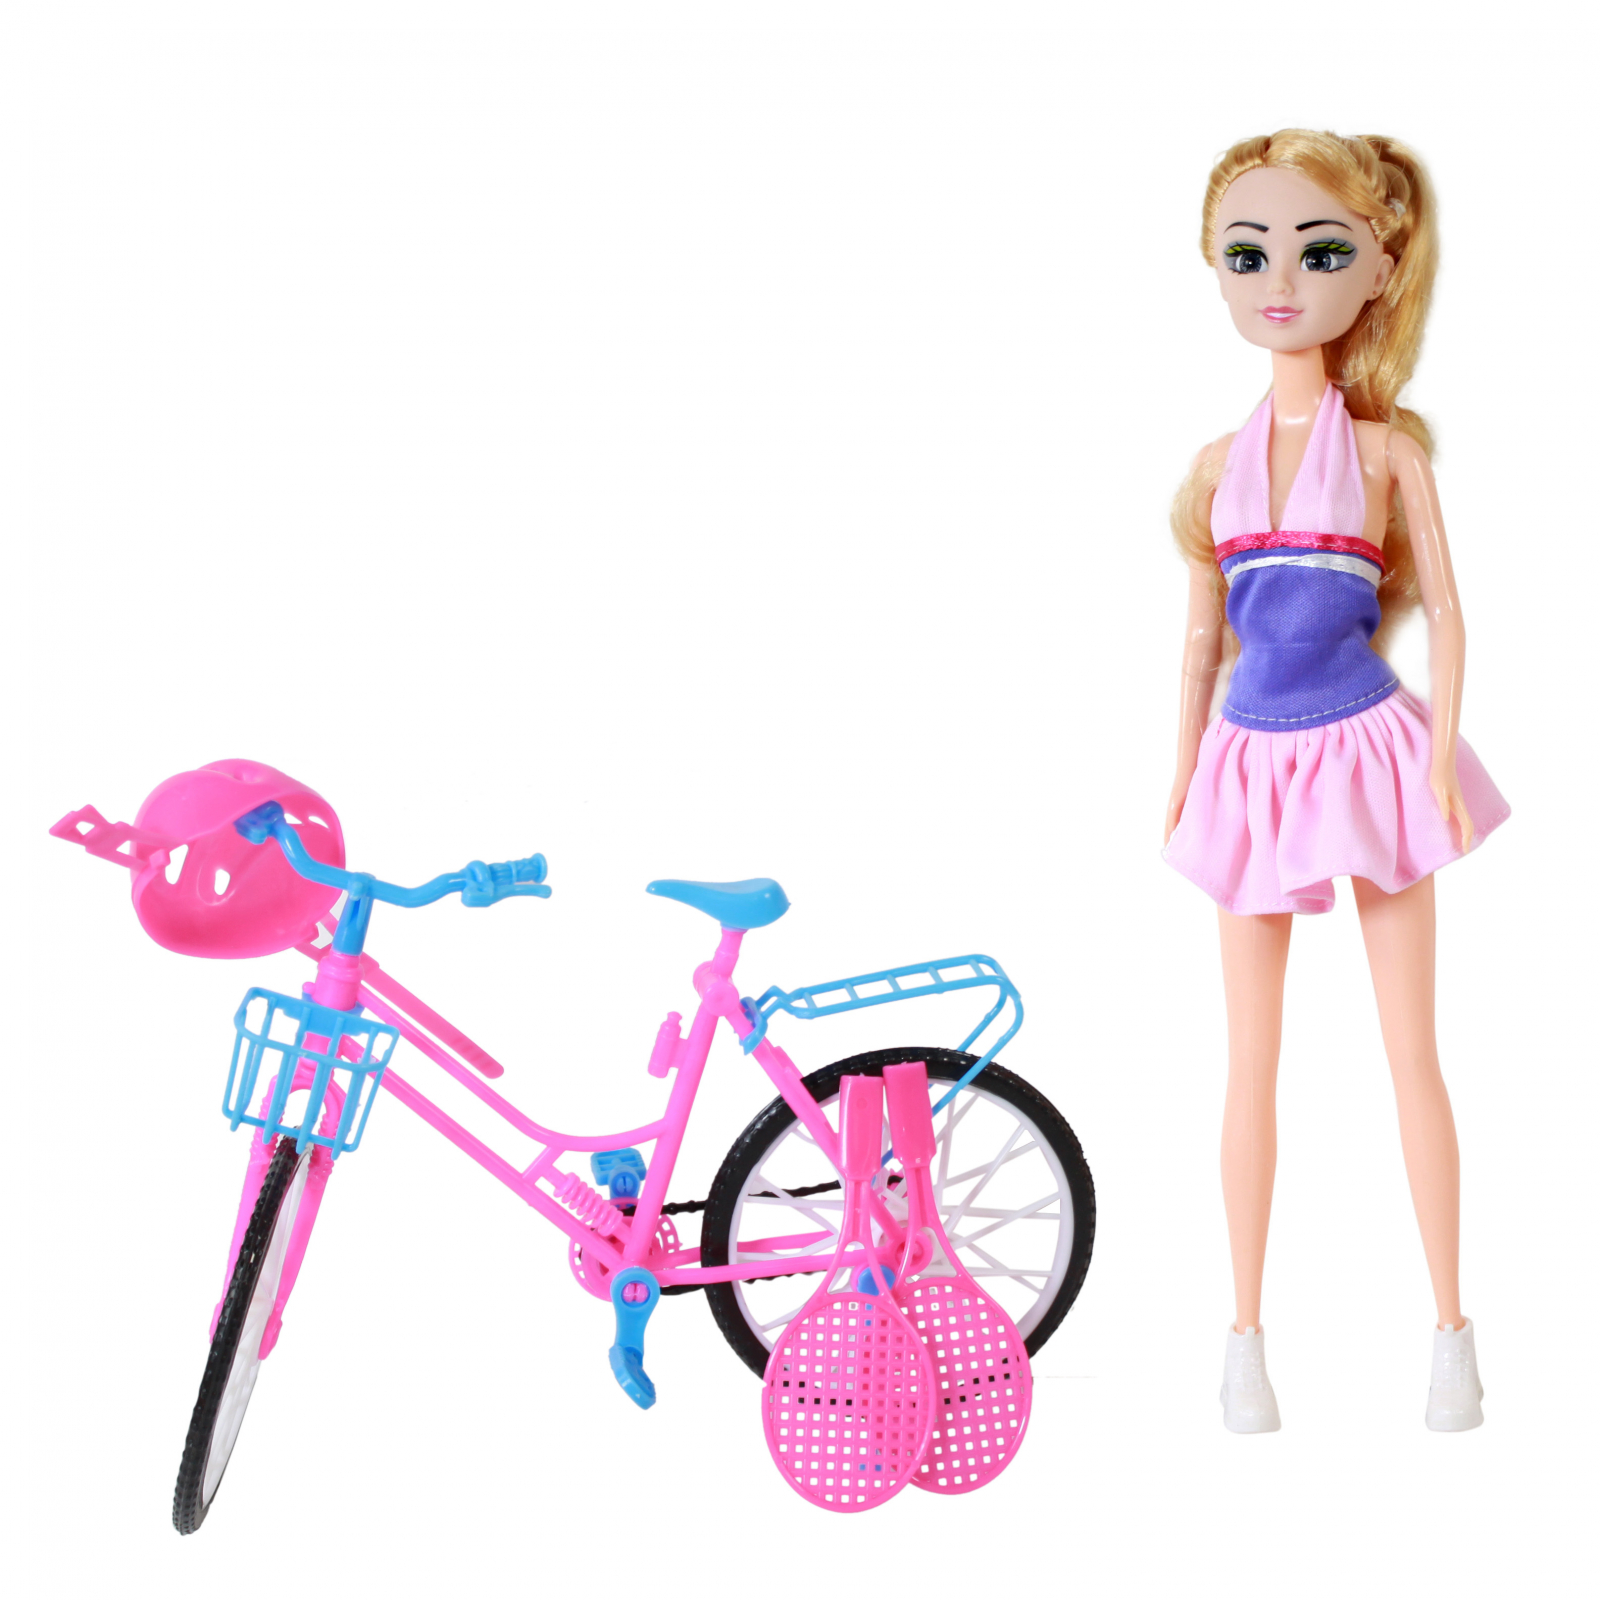 TychoTyke Blonde Fashion Doll Playset With Blue Pink Bike And Sports Equipment Tennis Rackets - Blue